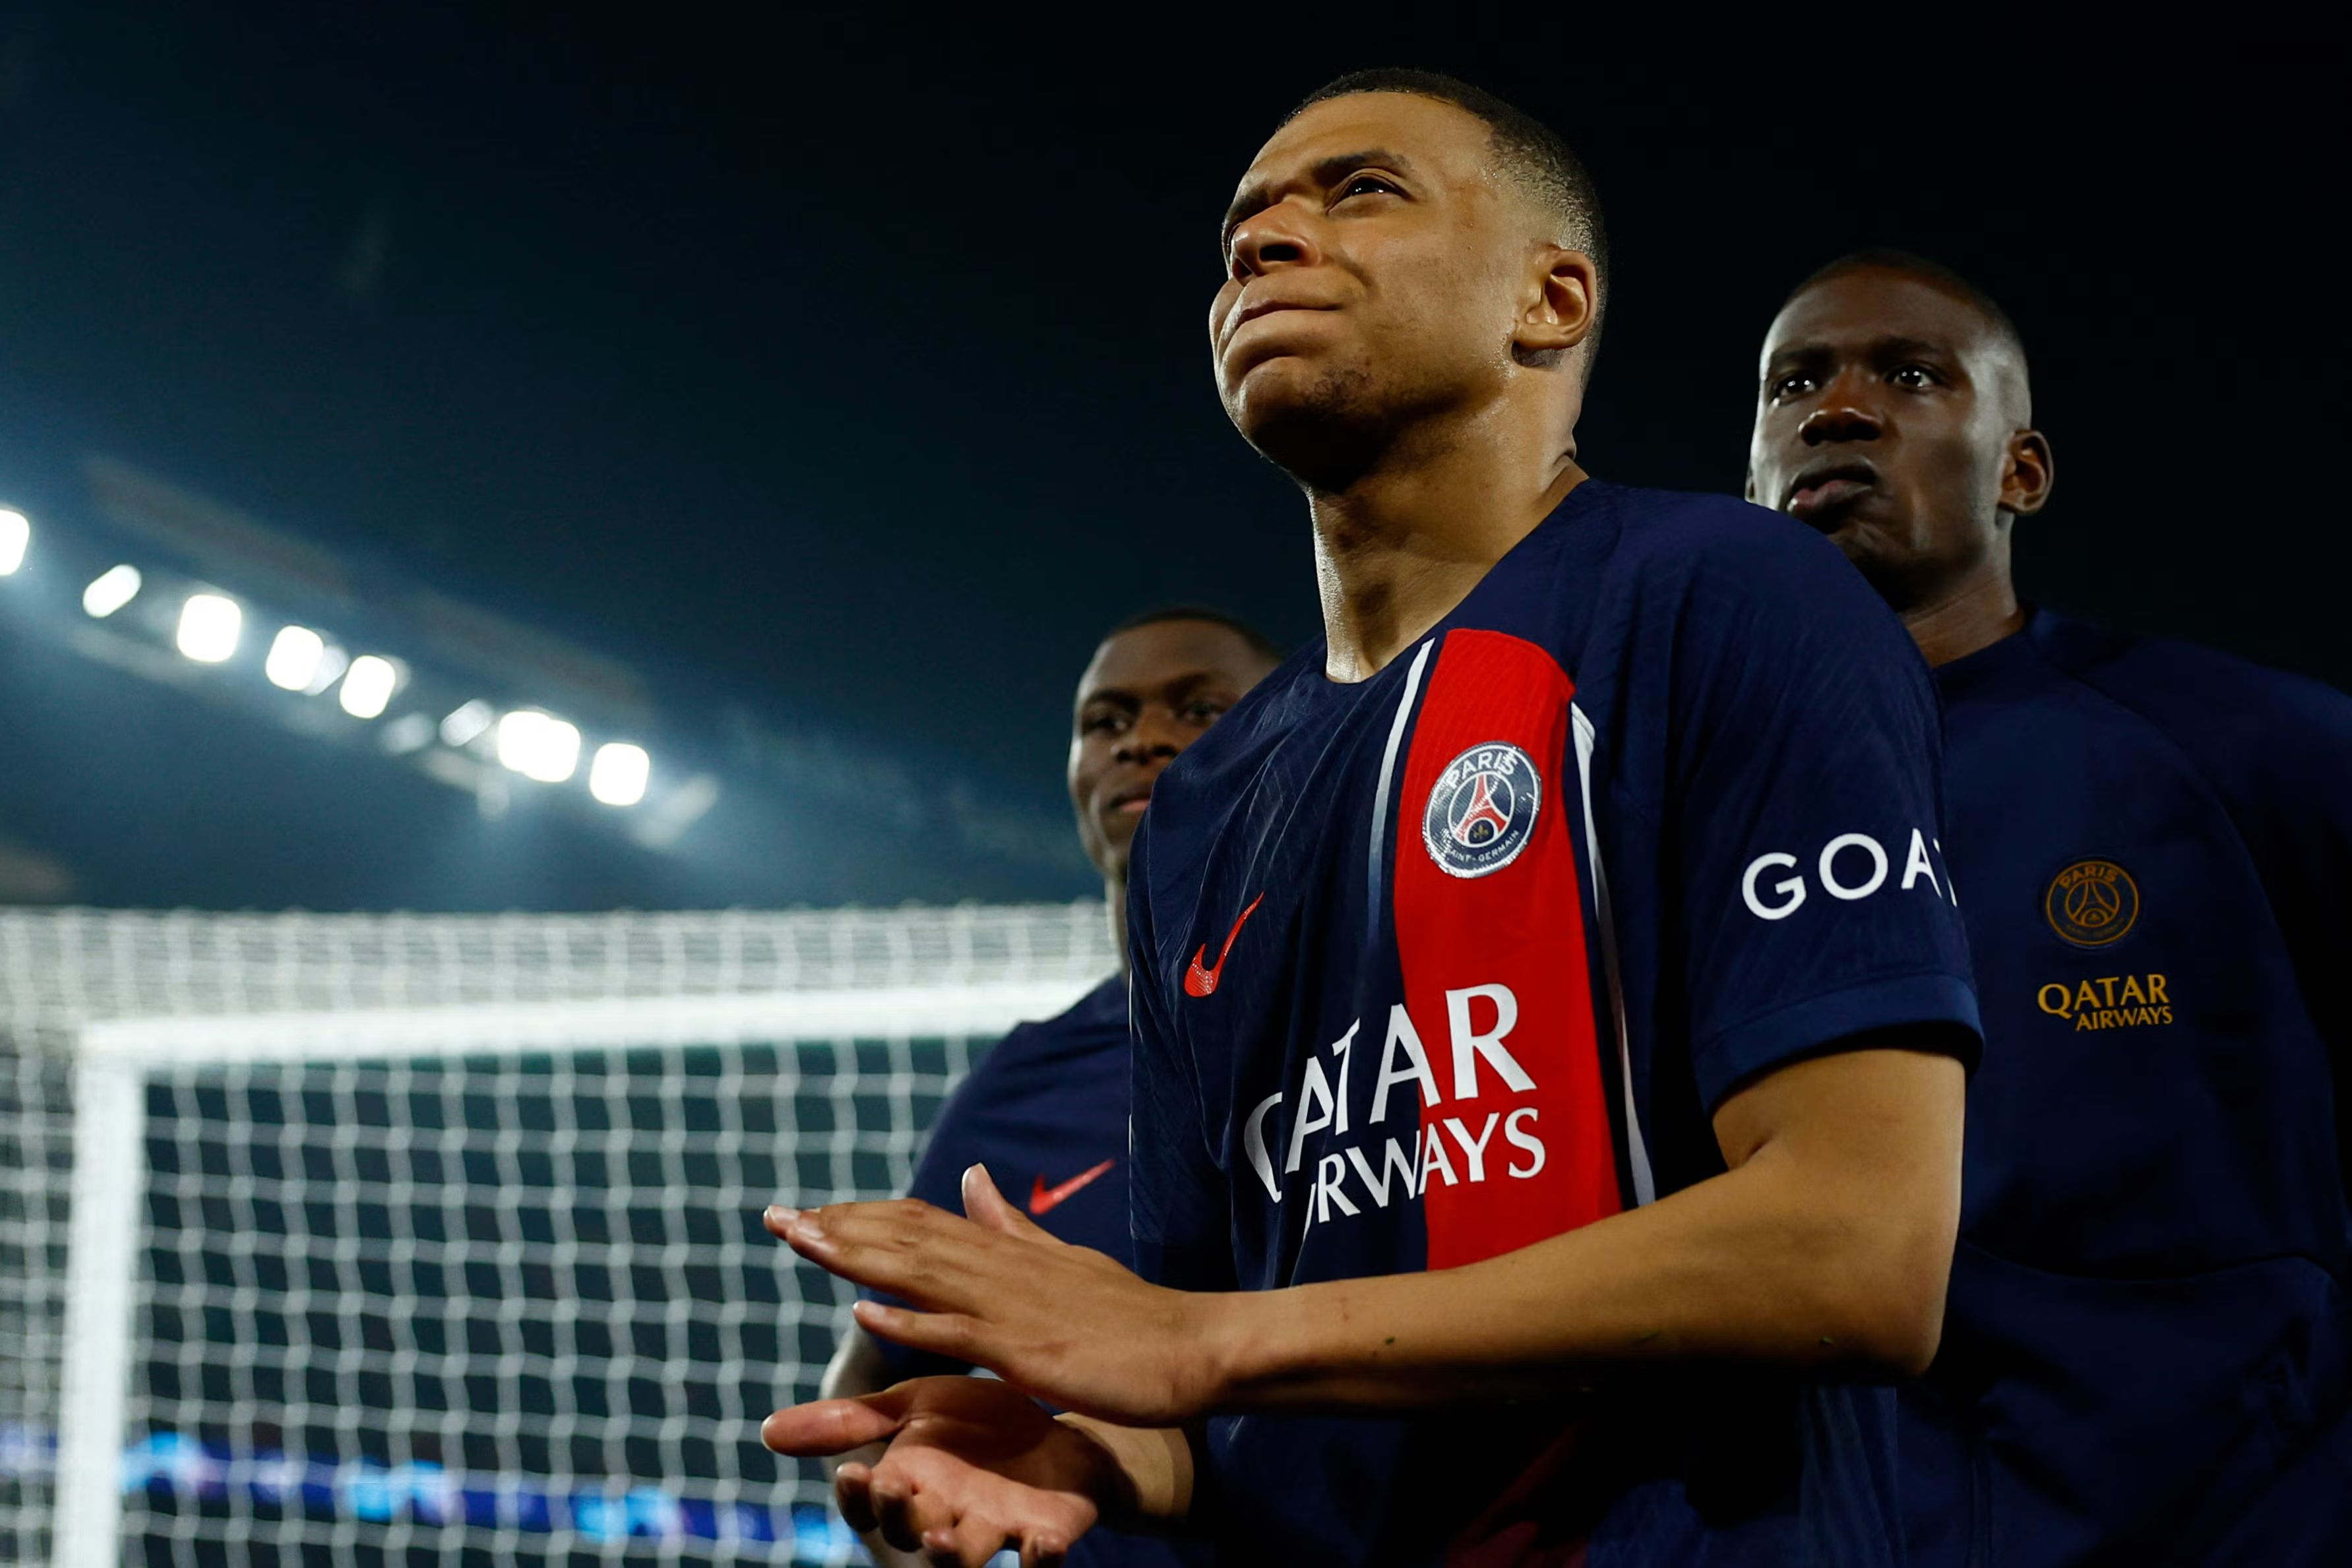 Real Madrid President Florentino Perez called Kylian Mbappe after PSG elimination – report